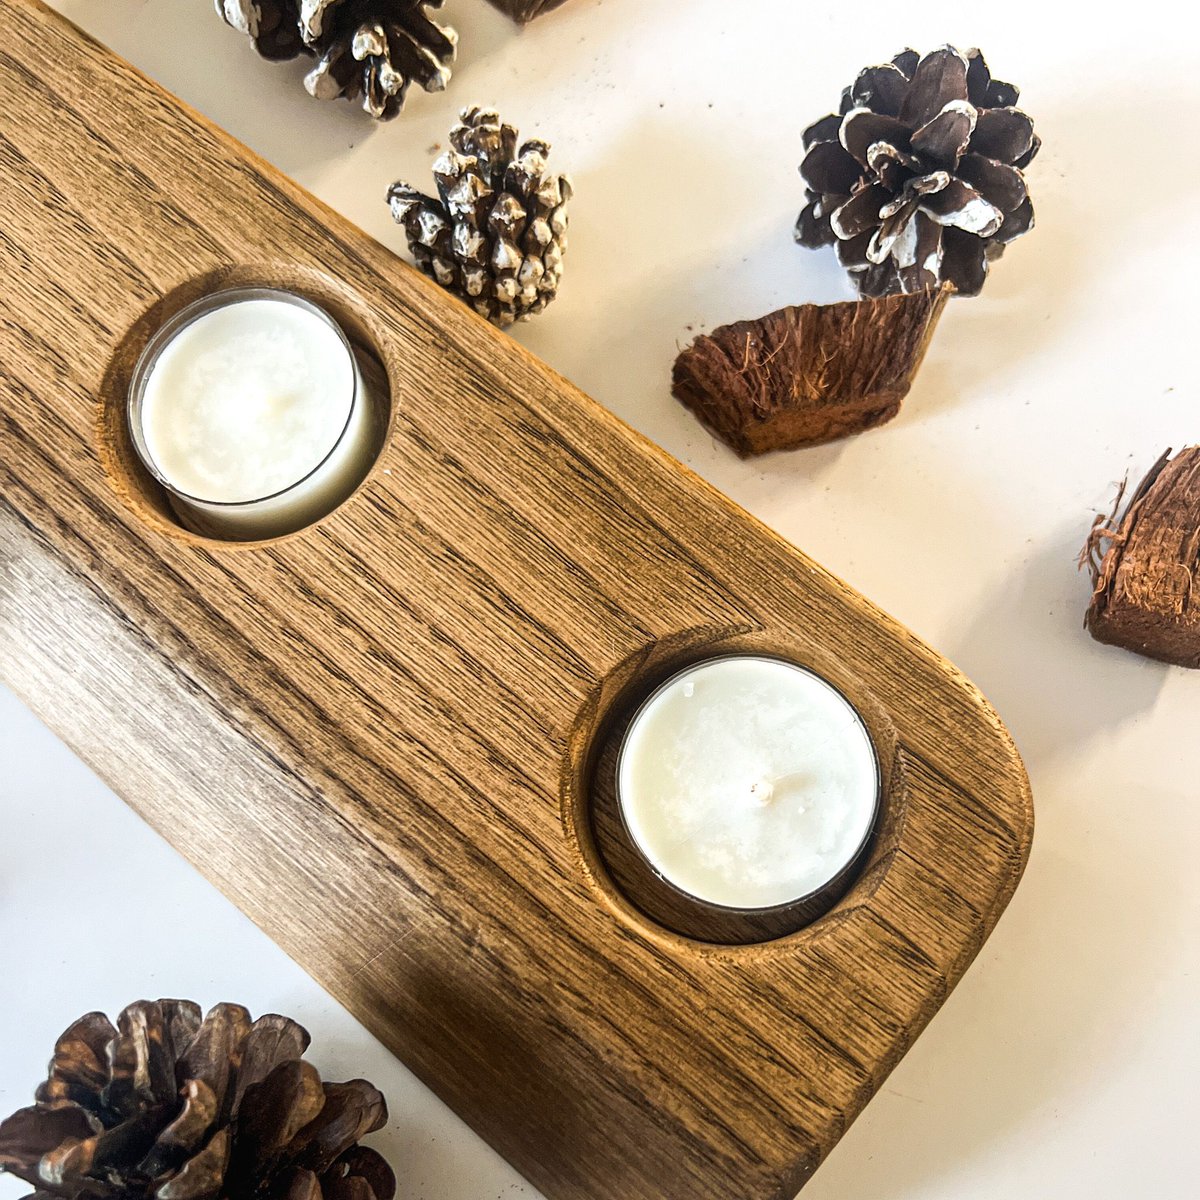 If you're looking for the quintessential scents of a traditional Christmas tree, look no further than our Fir Tree tealights. The aroma picks up the fresh, citrusy pine needles and mellow wood of spruce while conjuring up the scents of Christmas morning. buff.ly/46xPIgh